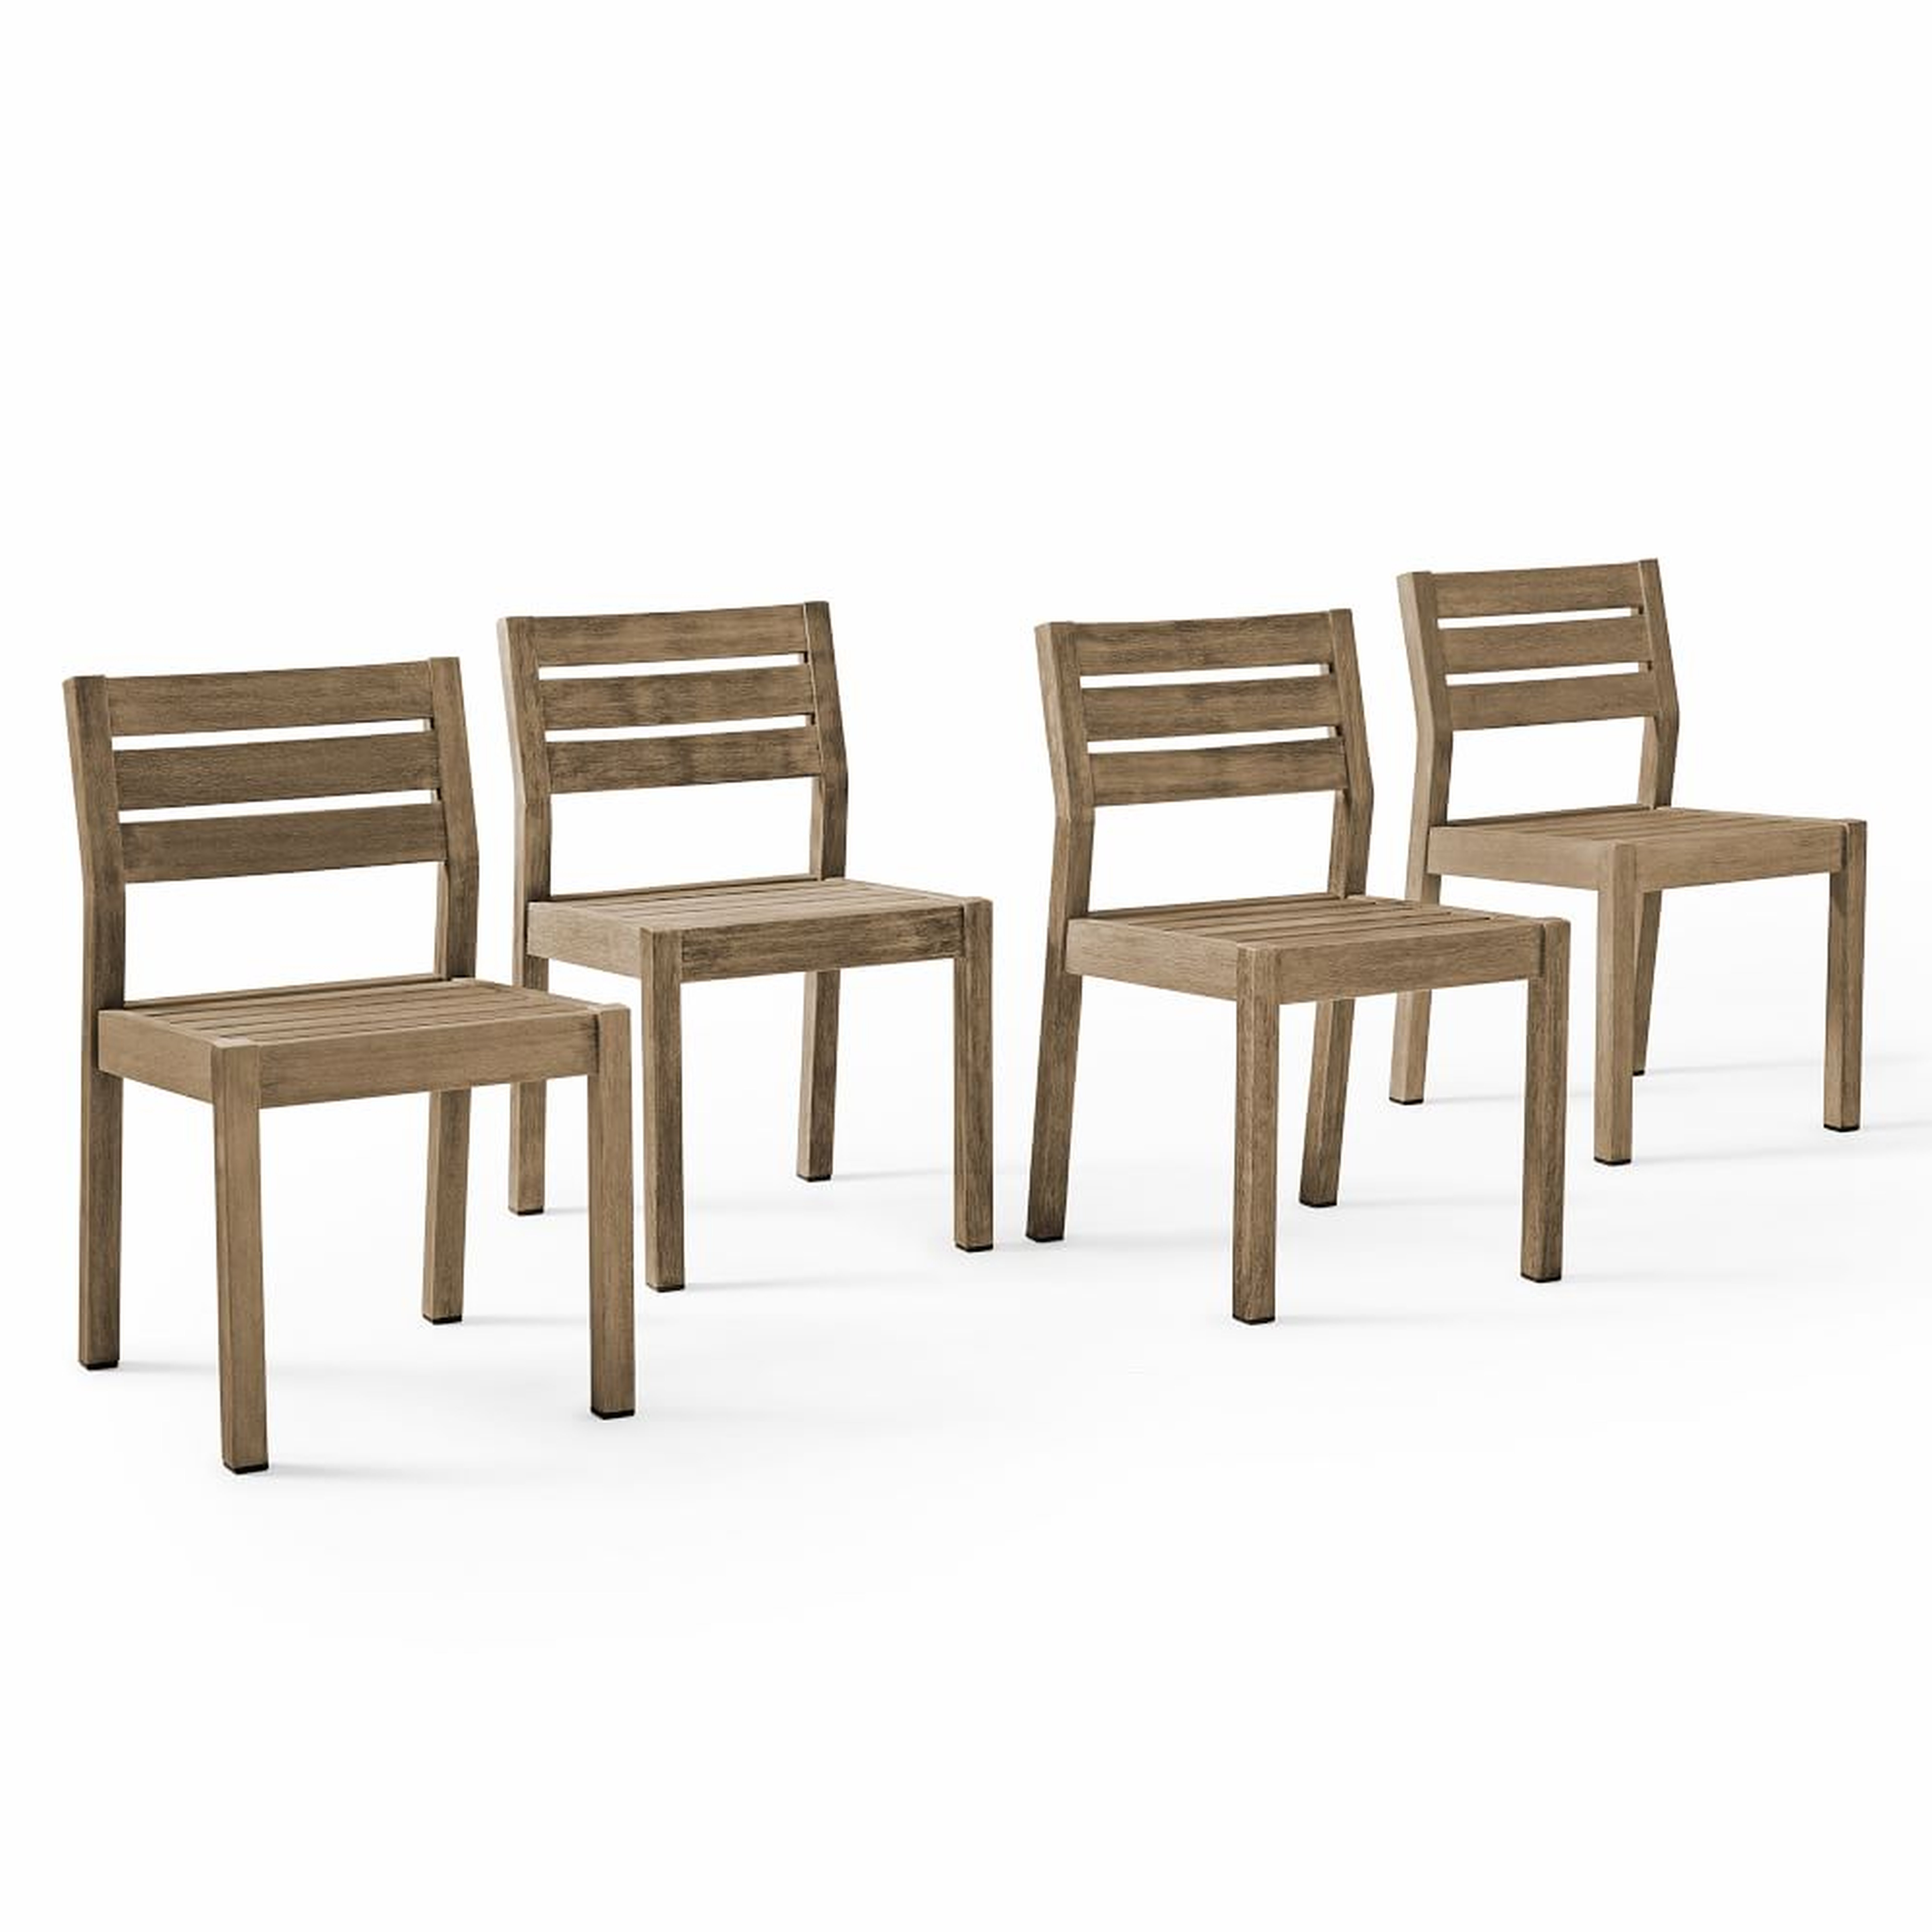 Portside Outdoor Dining Chair, Driftwood, Set of 4 - West Elm